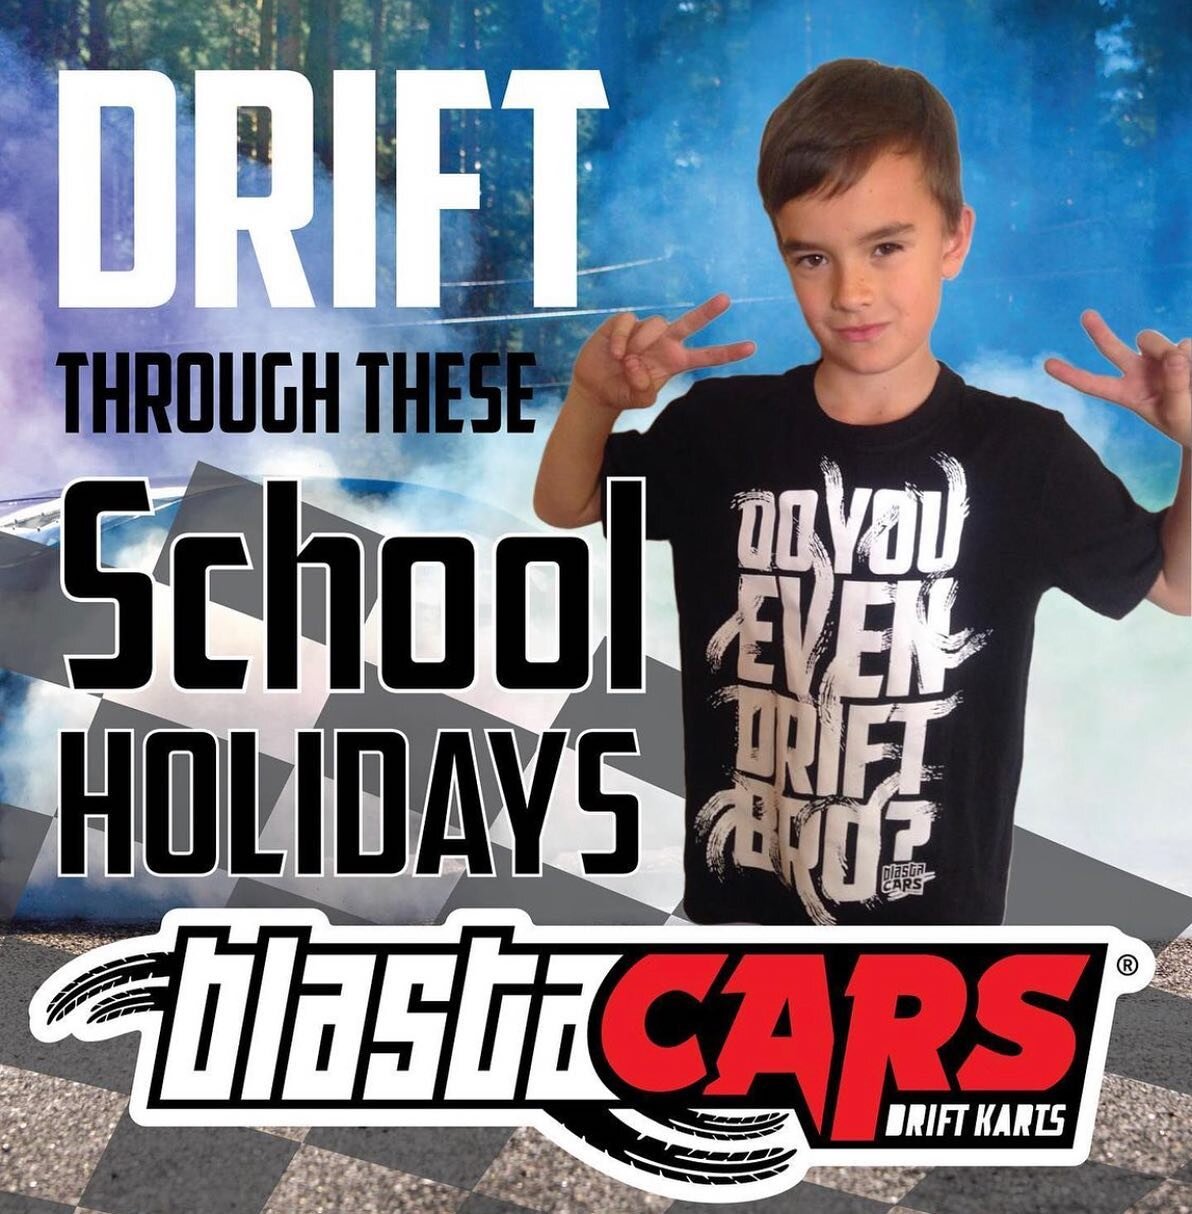 🏁The school holiday are just about here and we have you sorted. 🏁

Check out our daily deals to get you sliding sideways with us.

We will be open these school holidays from 10 am 8 pm Monday - Thursday. 10 am - 9 pm Friday, 9 am - 9 pm Saturday an